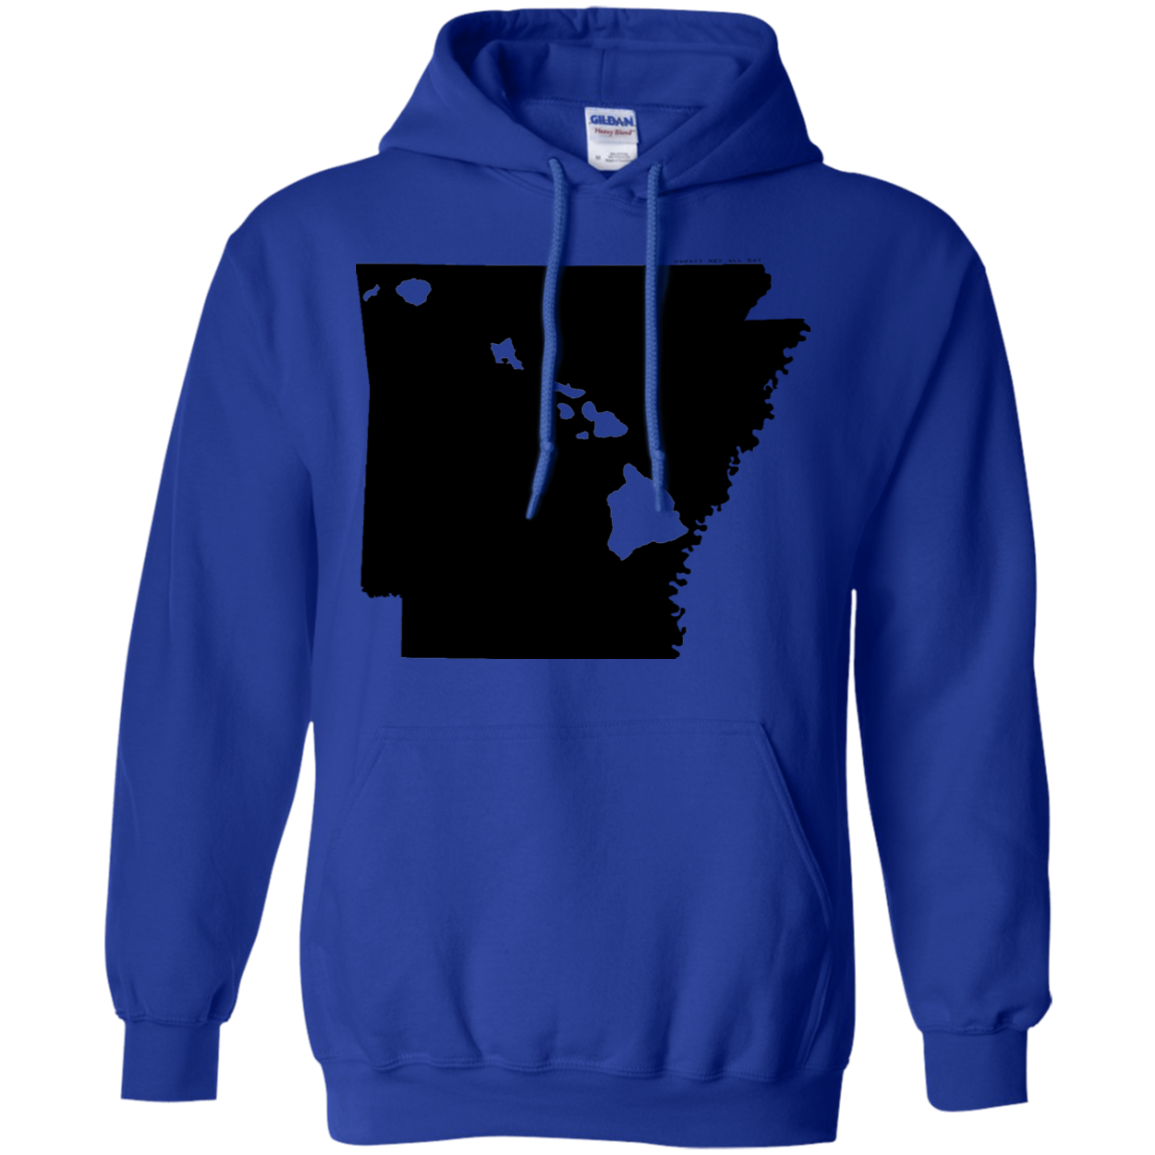 Living in Arkansas with Hawaii Roots Pullover Hoodie, Sweatshirts, Hawaii Nei All Day